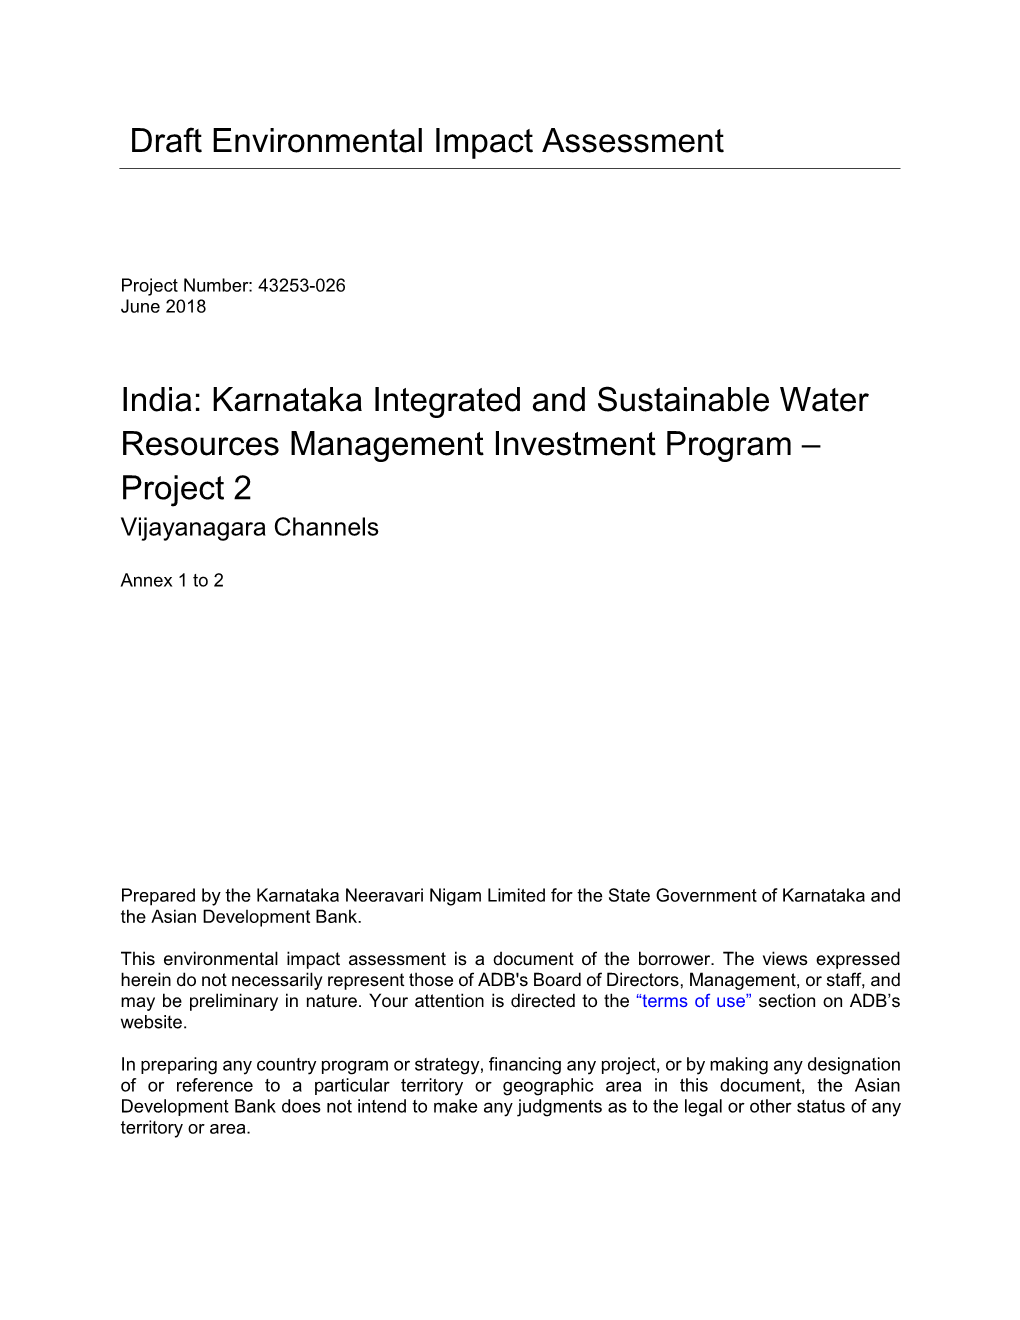 India: Karnataka Integrated and Sustainable Water Resources Management Investment Program – Project 2 Vijayanagara Channels